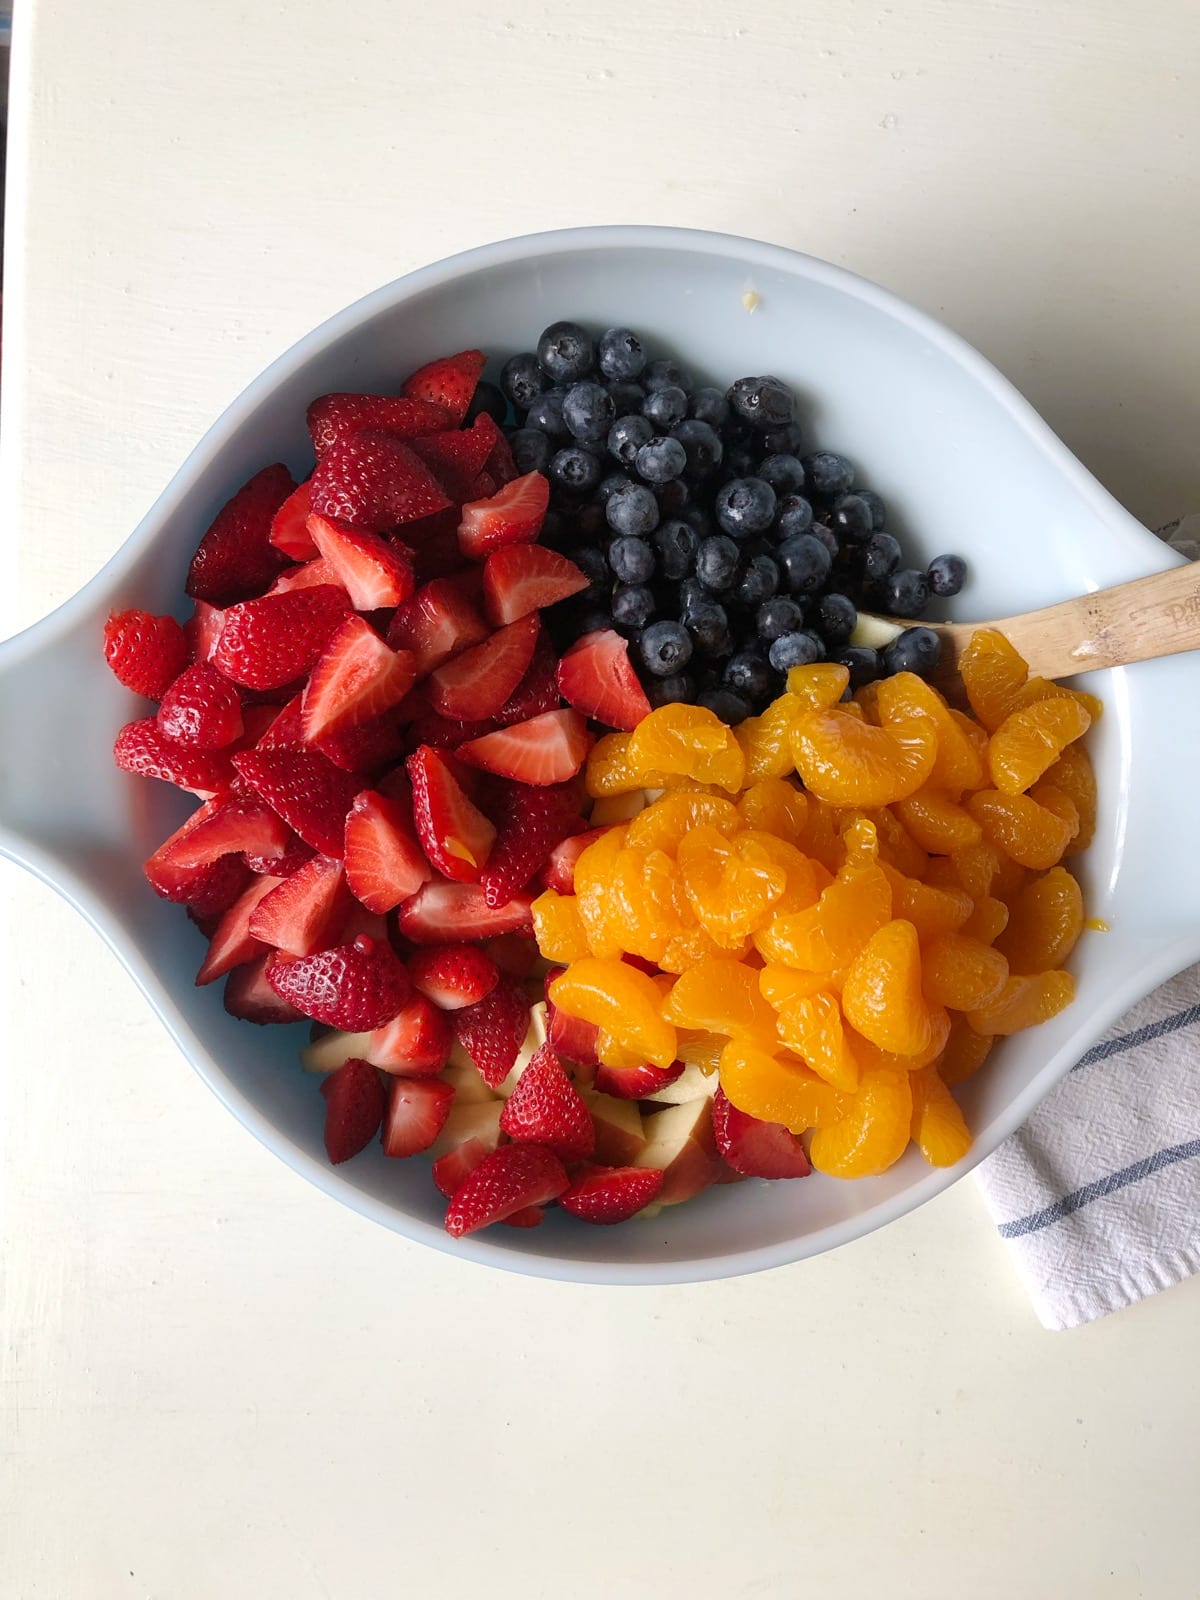 Wondering how to make fruit salad? Use this fruit salad recipe for get-togethers, parties, a side dish for grilling out, or a snack on the go.